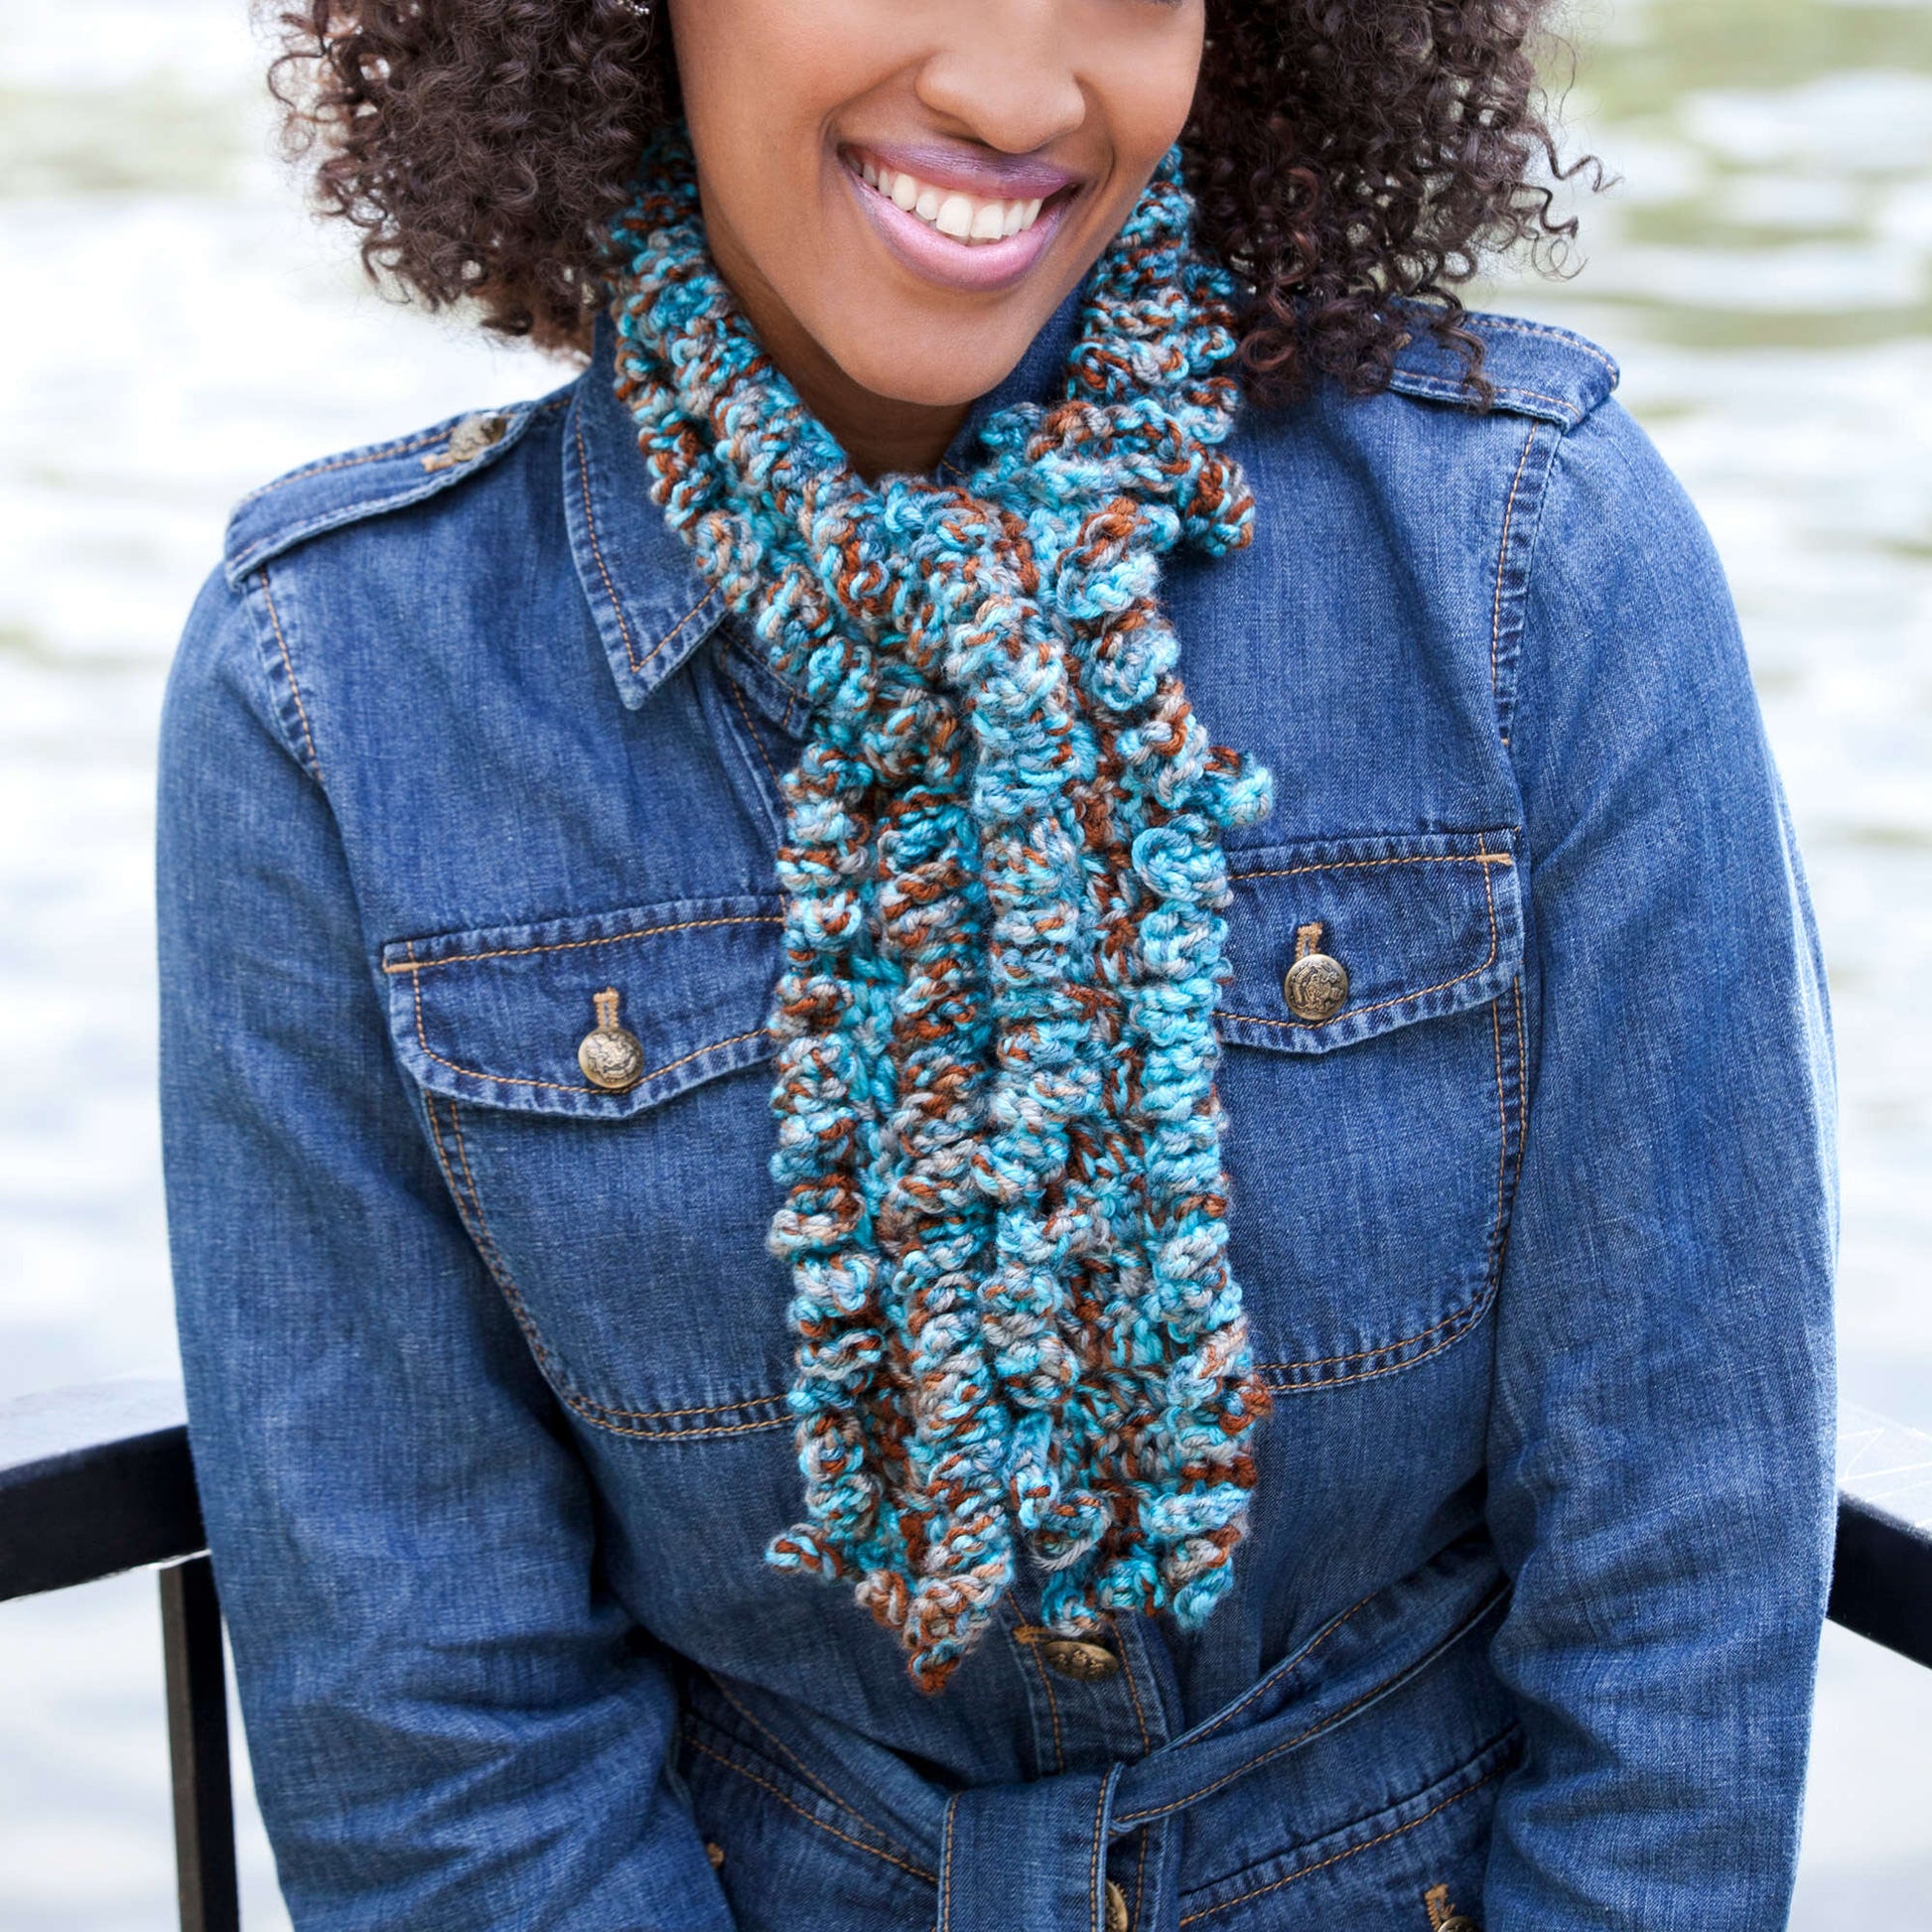 Free Red Heart Textured Travel Scarf Crochet Pattern